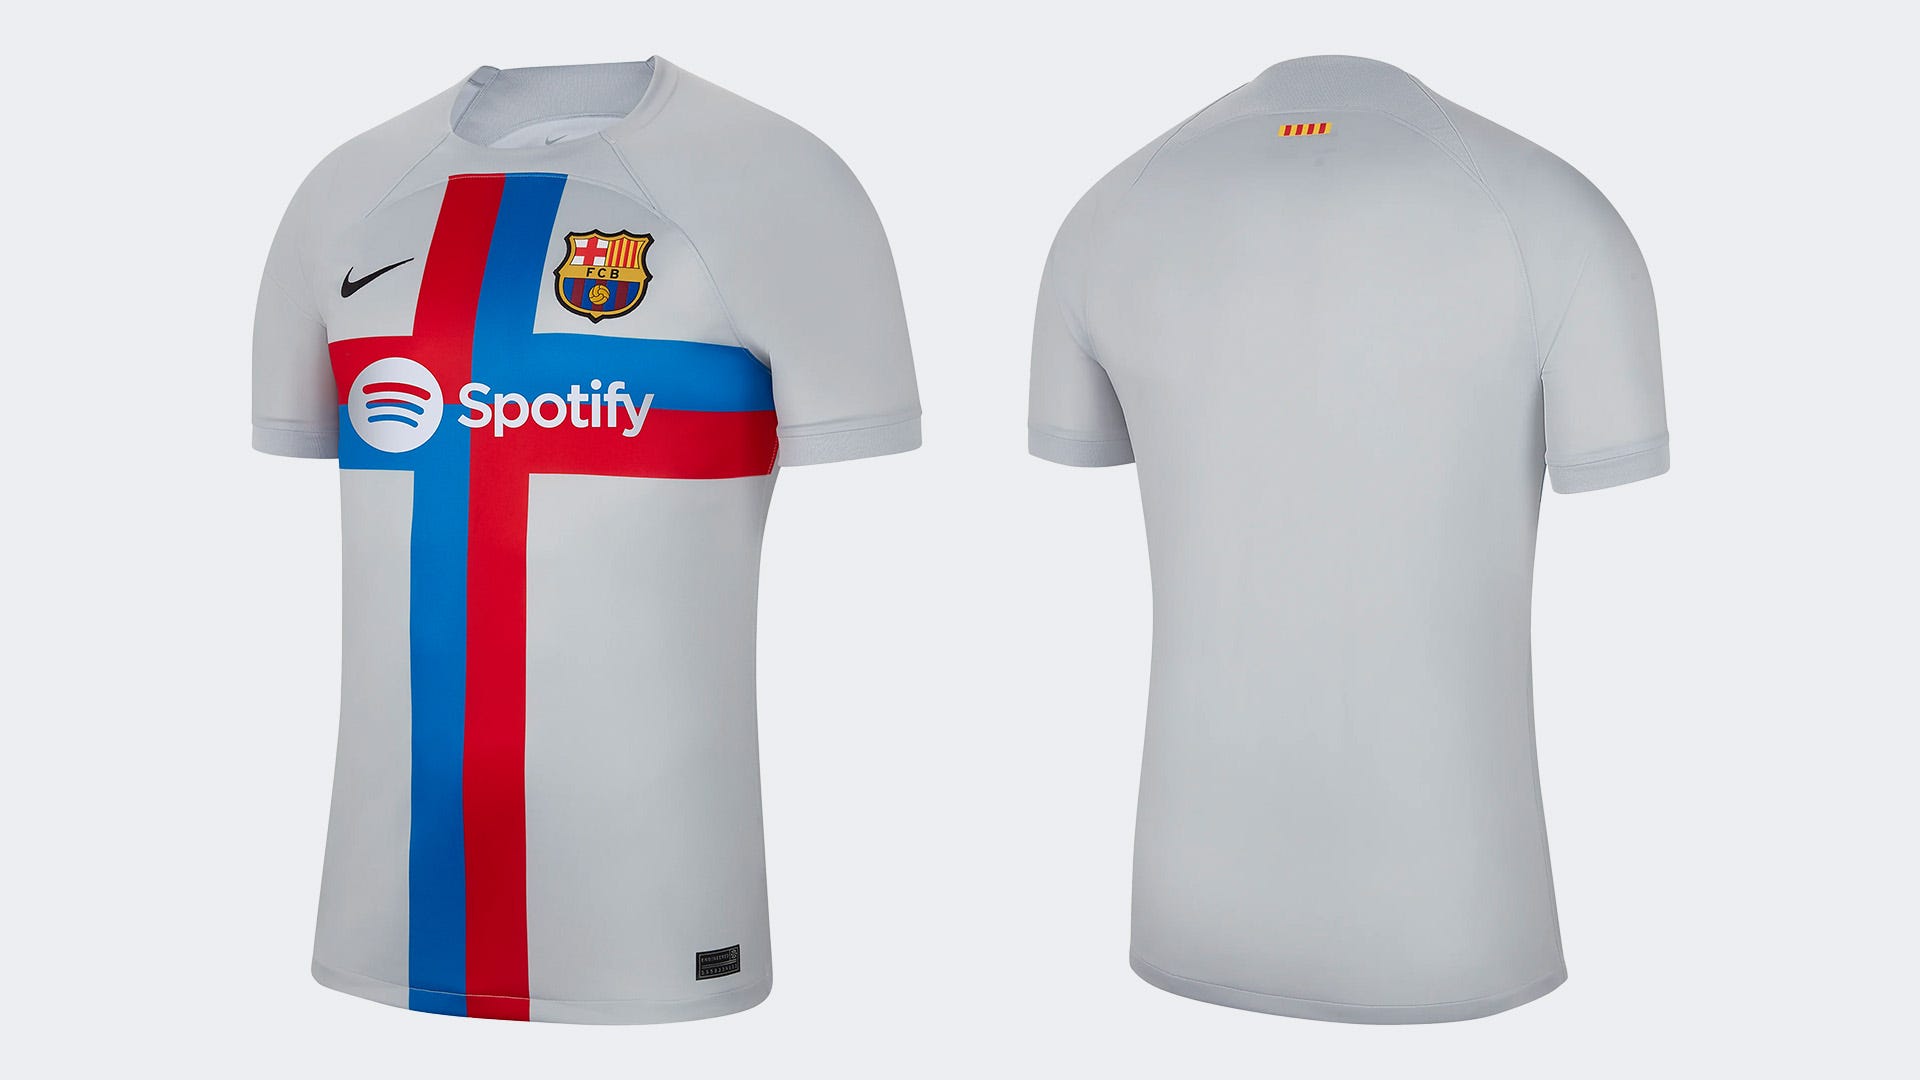 Barcelona and Nike unveil new 2022-23 third kit inspired by the